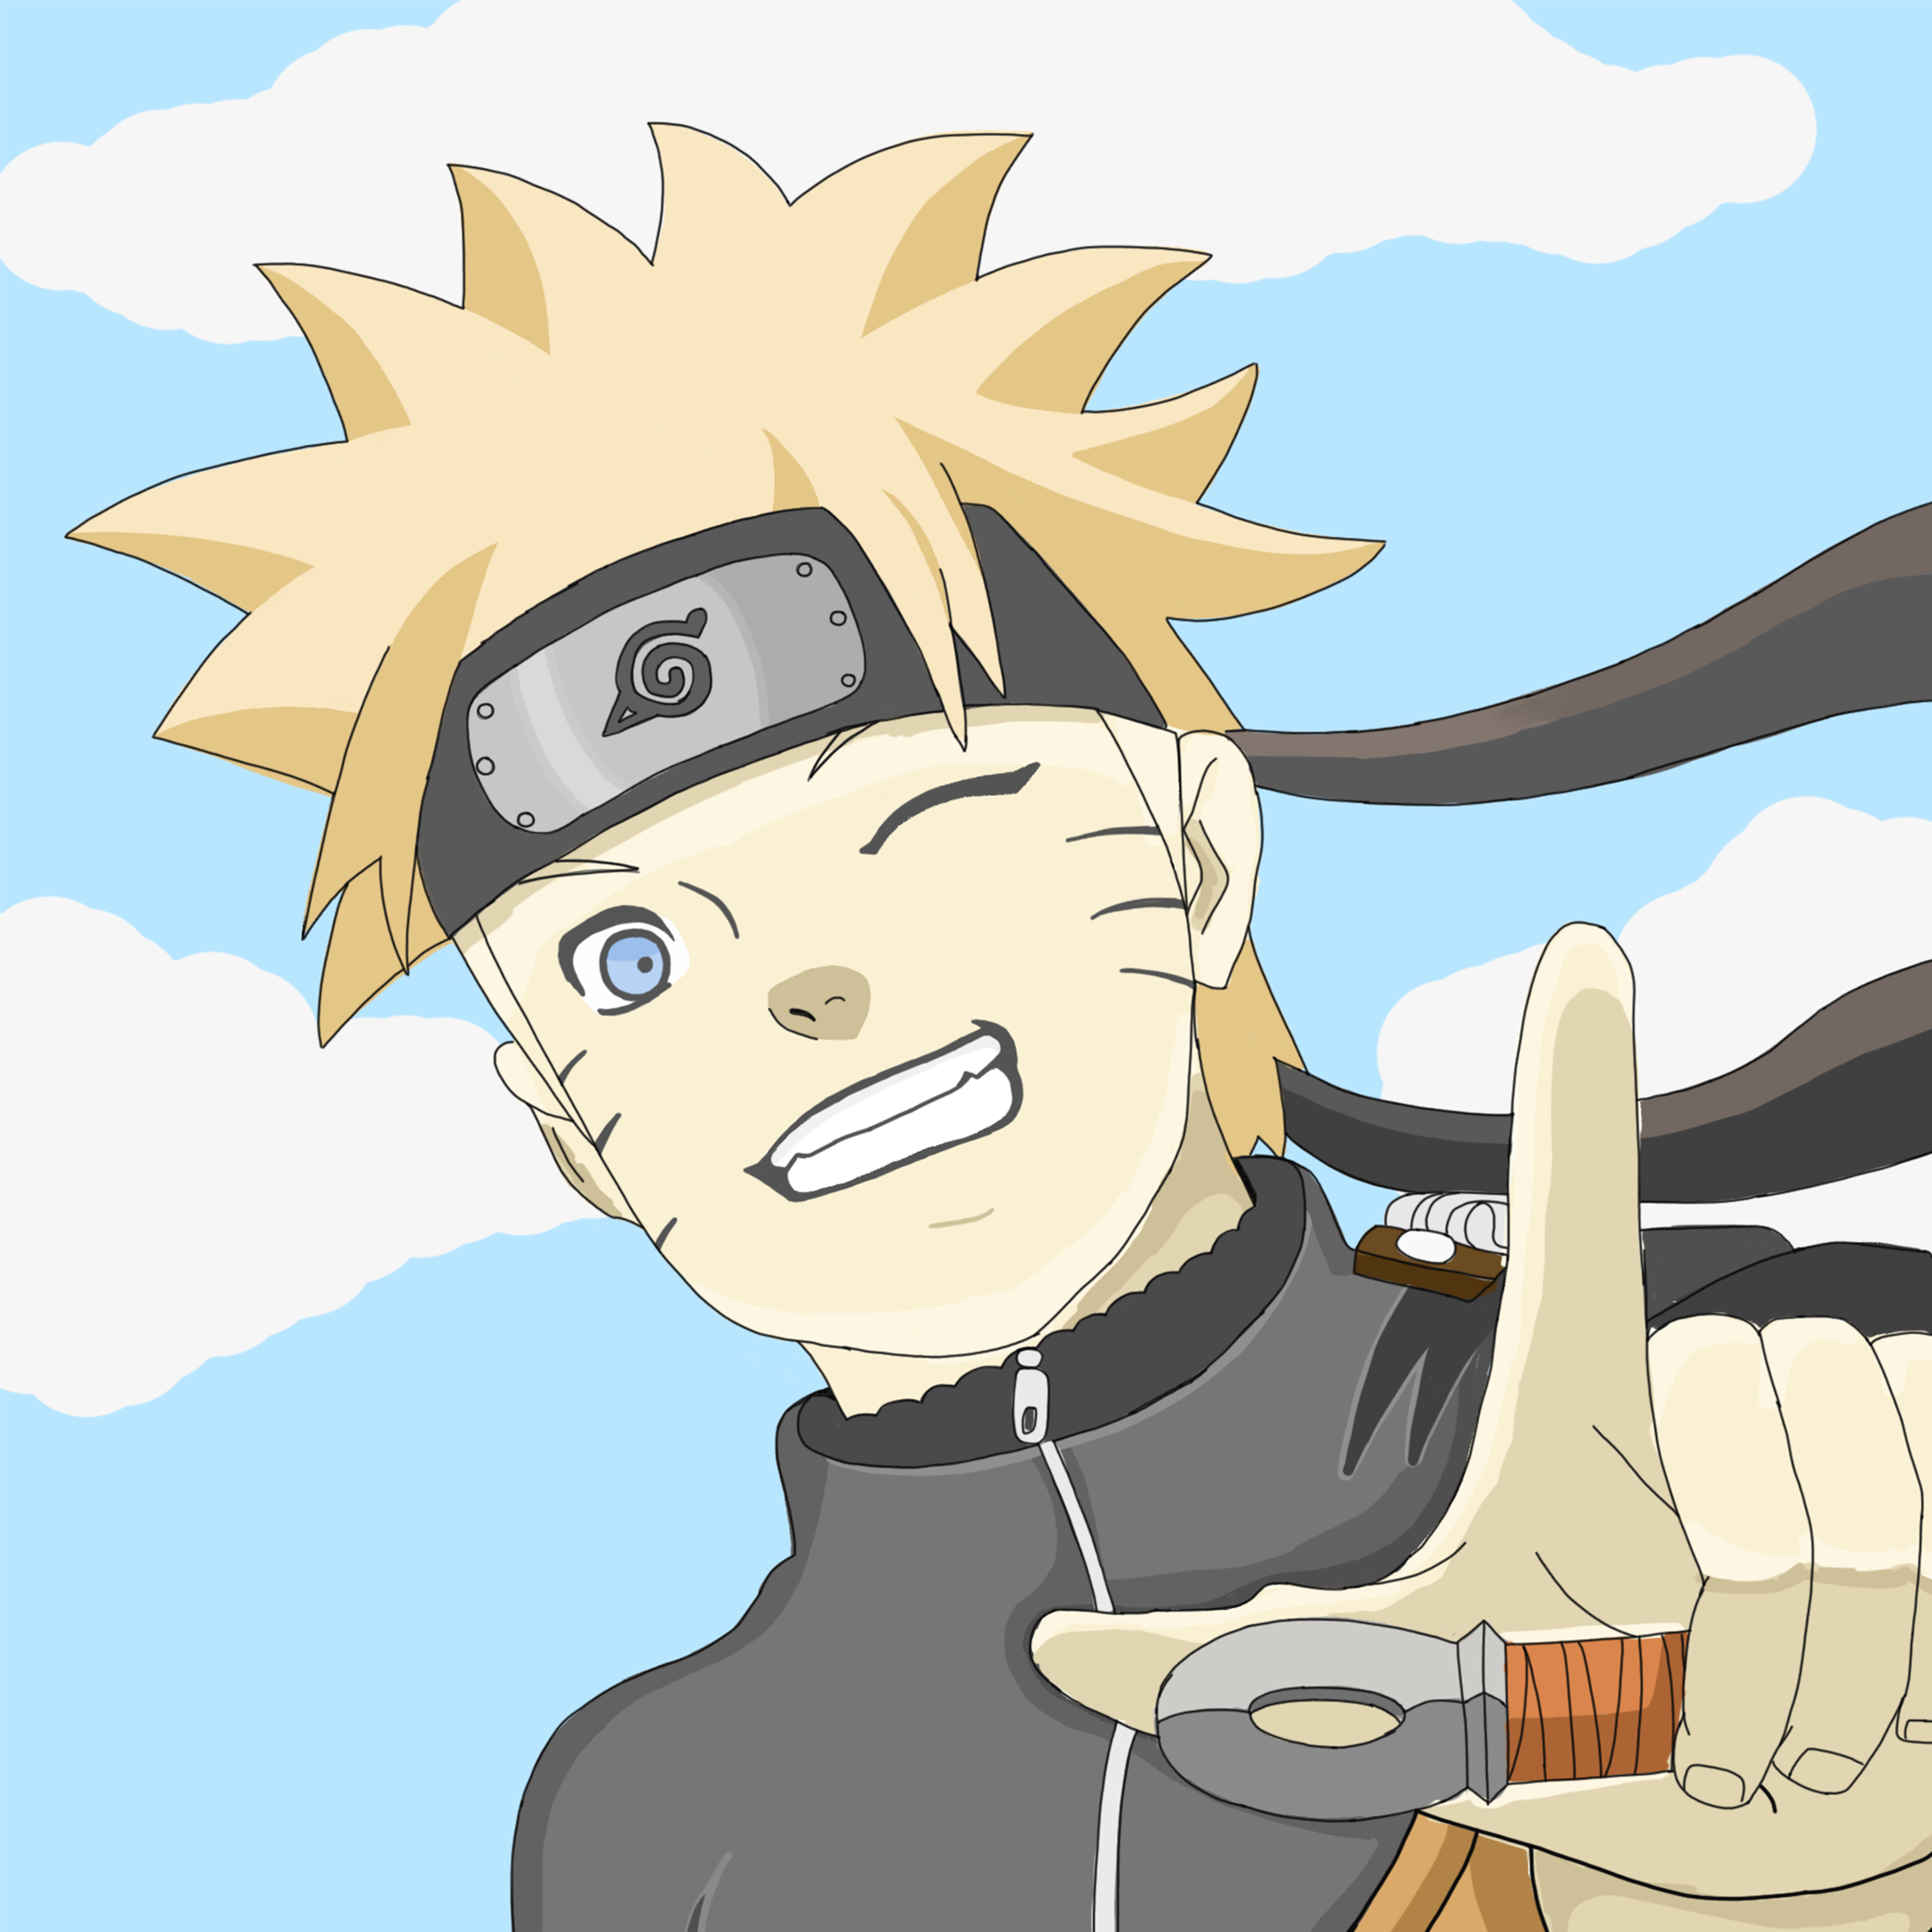 drawing of a wallpaper I found online. Link will be in the comments if you  want it! Enjoy! : r/Naruto